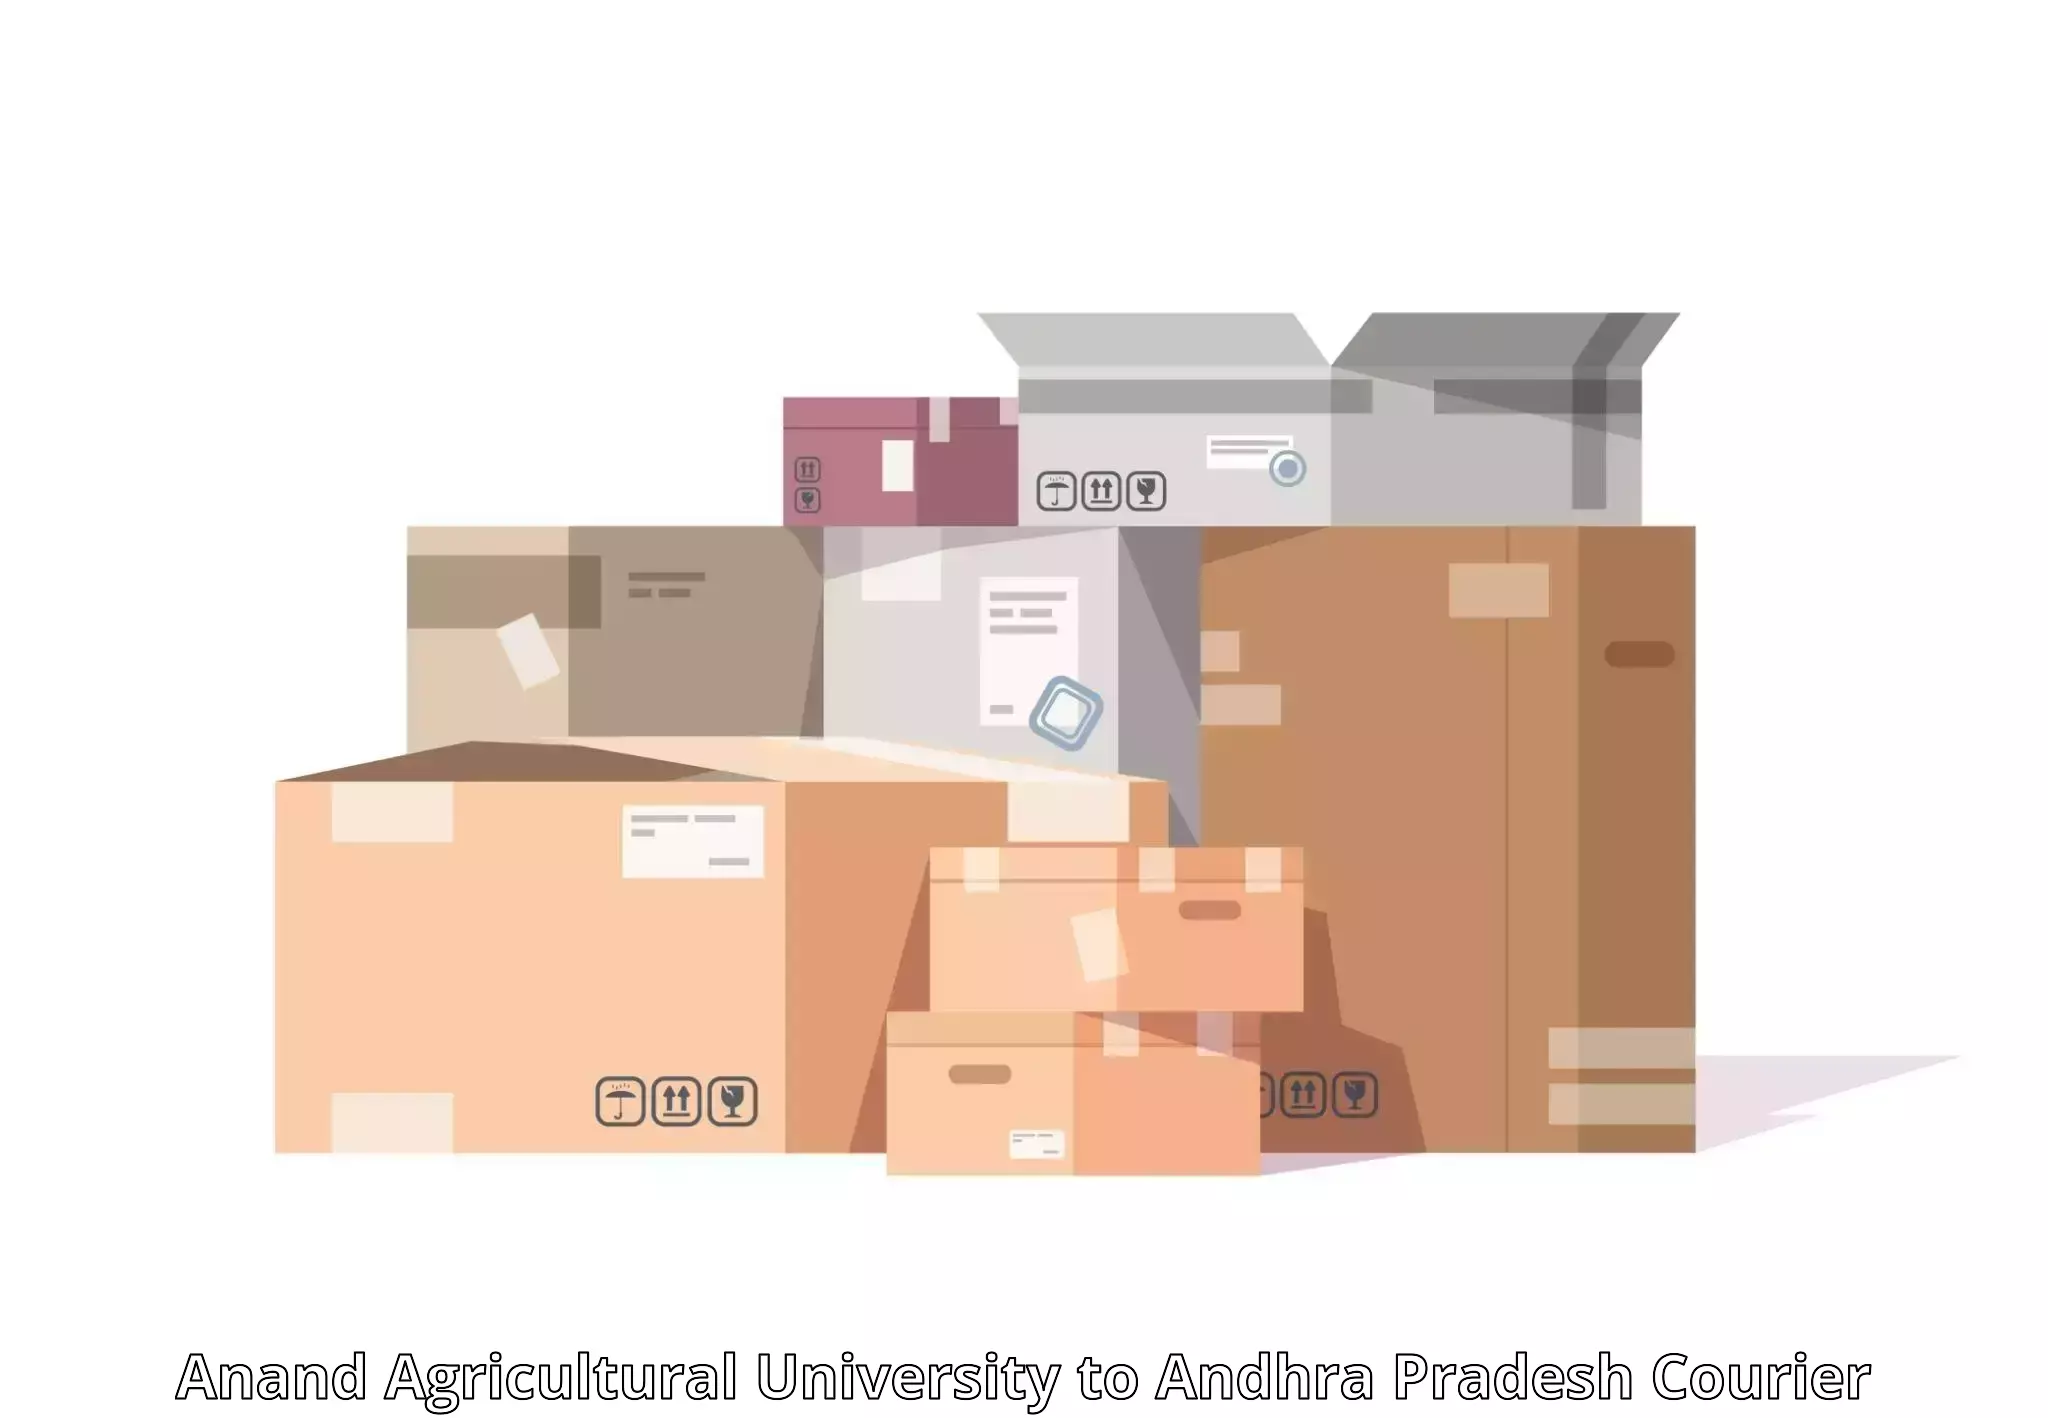 Global freight services Anand Agricultural University to Chimakurthy